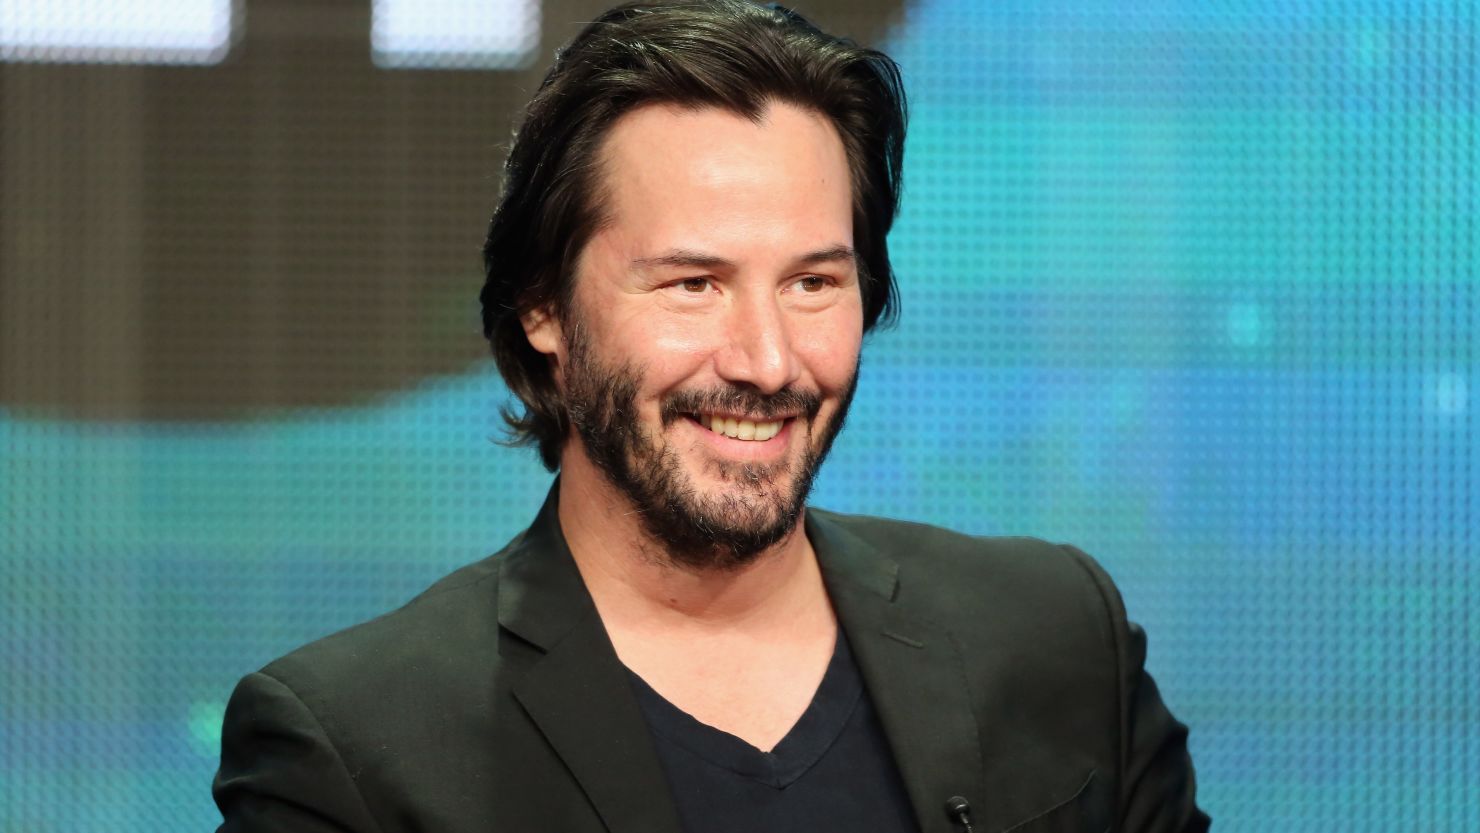 Keanu Reeves is reprising his role as Ted "Theodore" Logan in the new "Bill & Ted" movie.